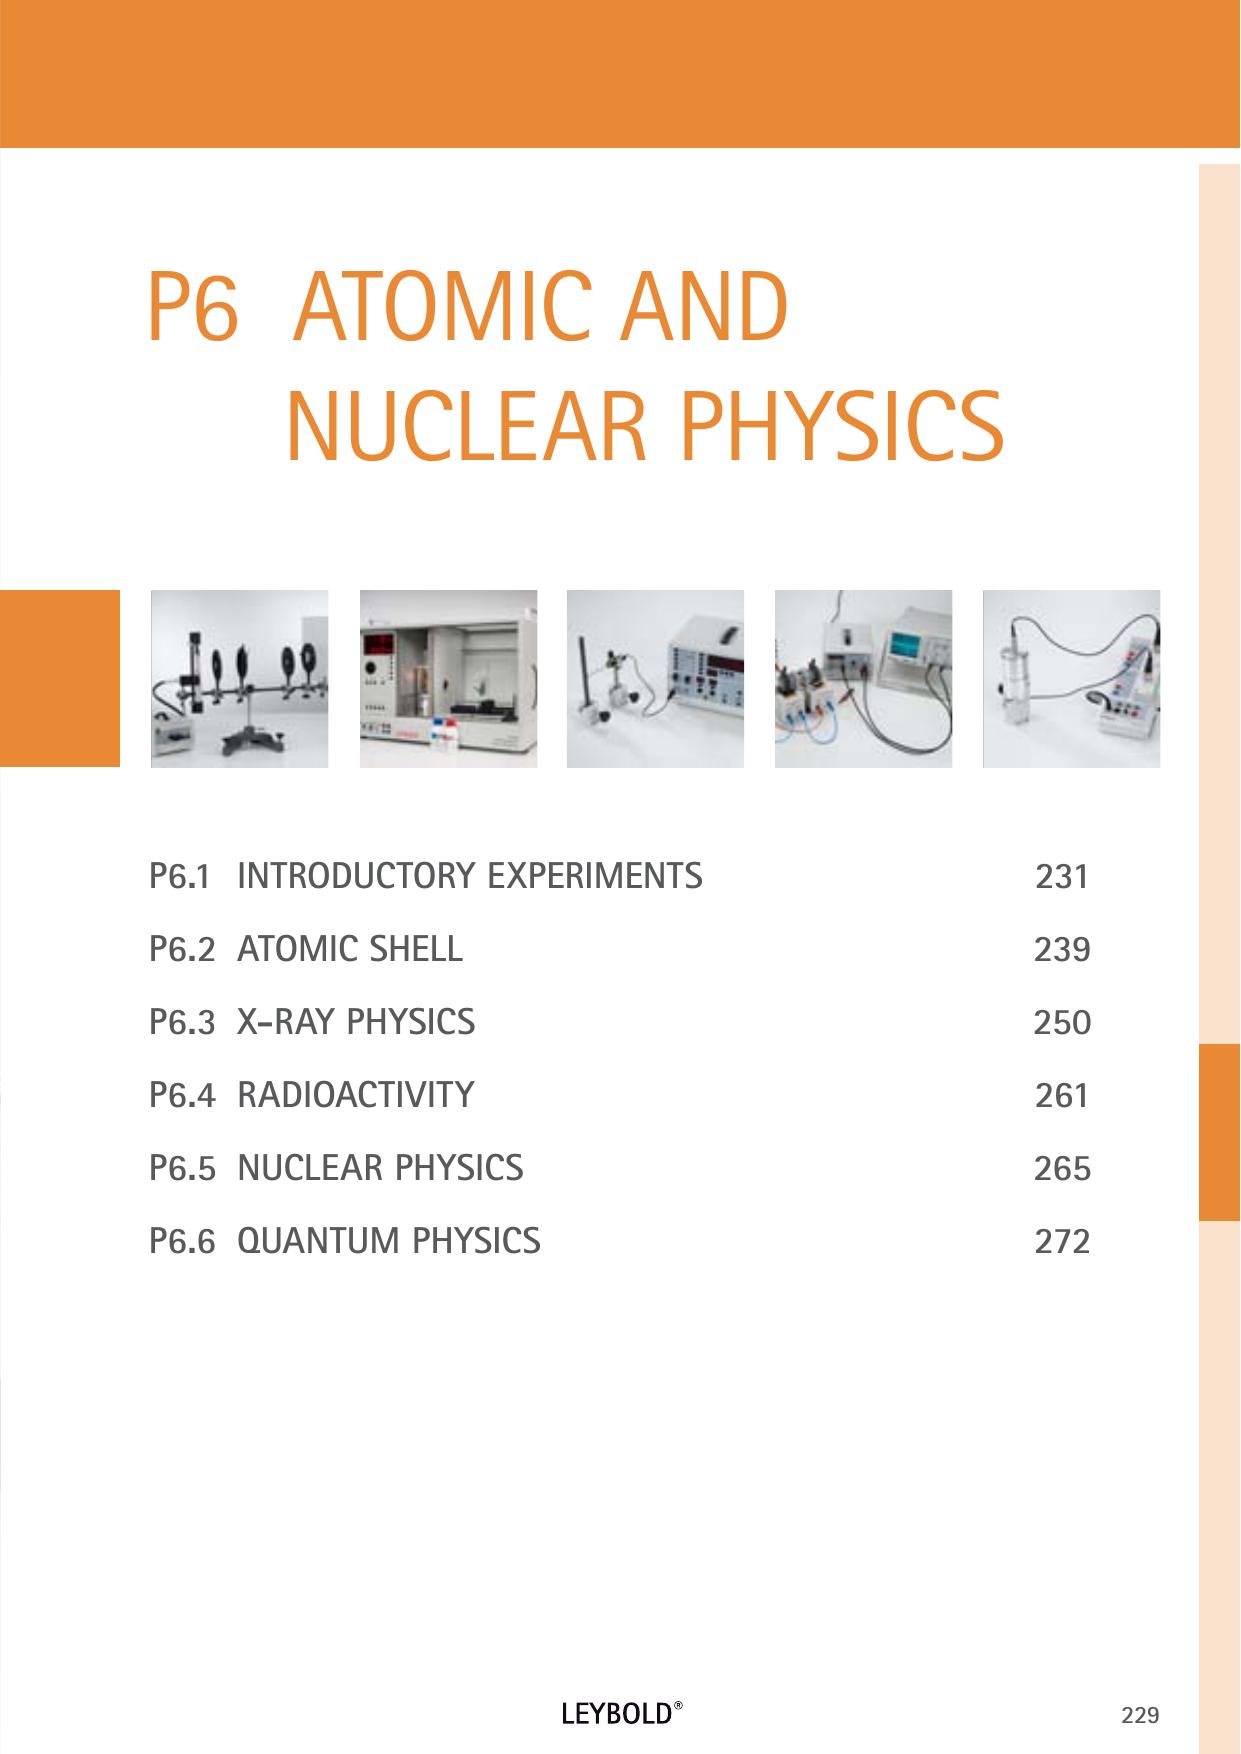 p6 atomic and nuclear physics 2015